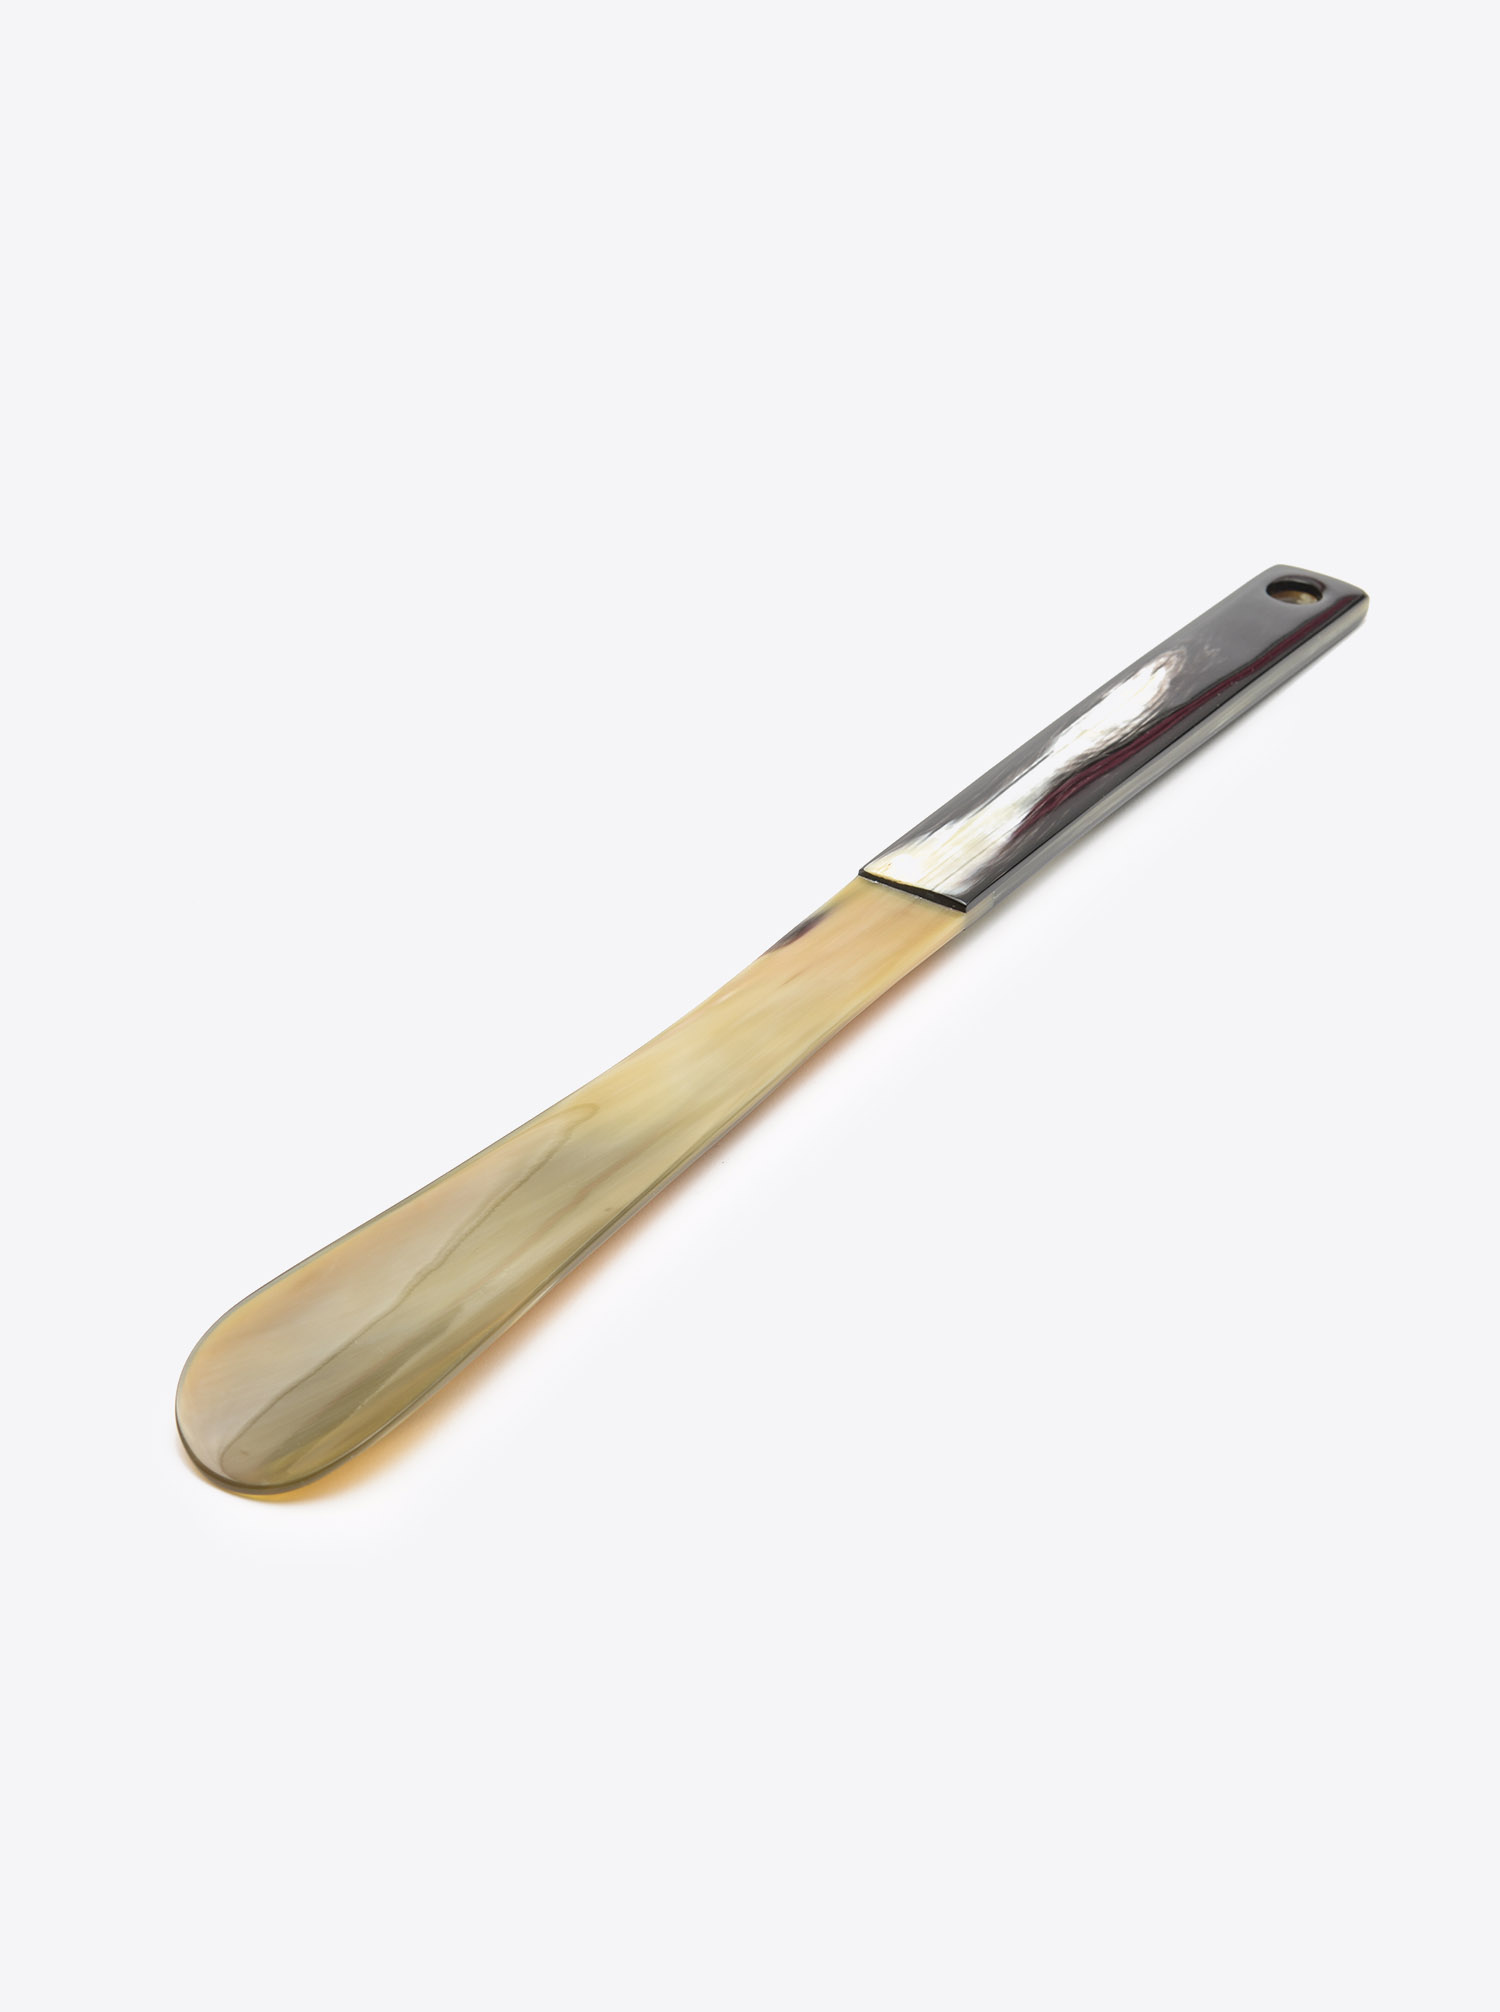 Shoehorn made of Horn light and dark handle